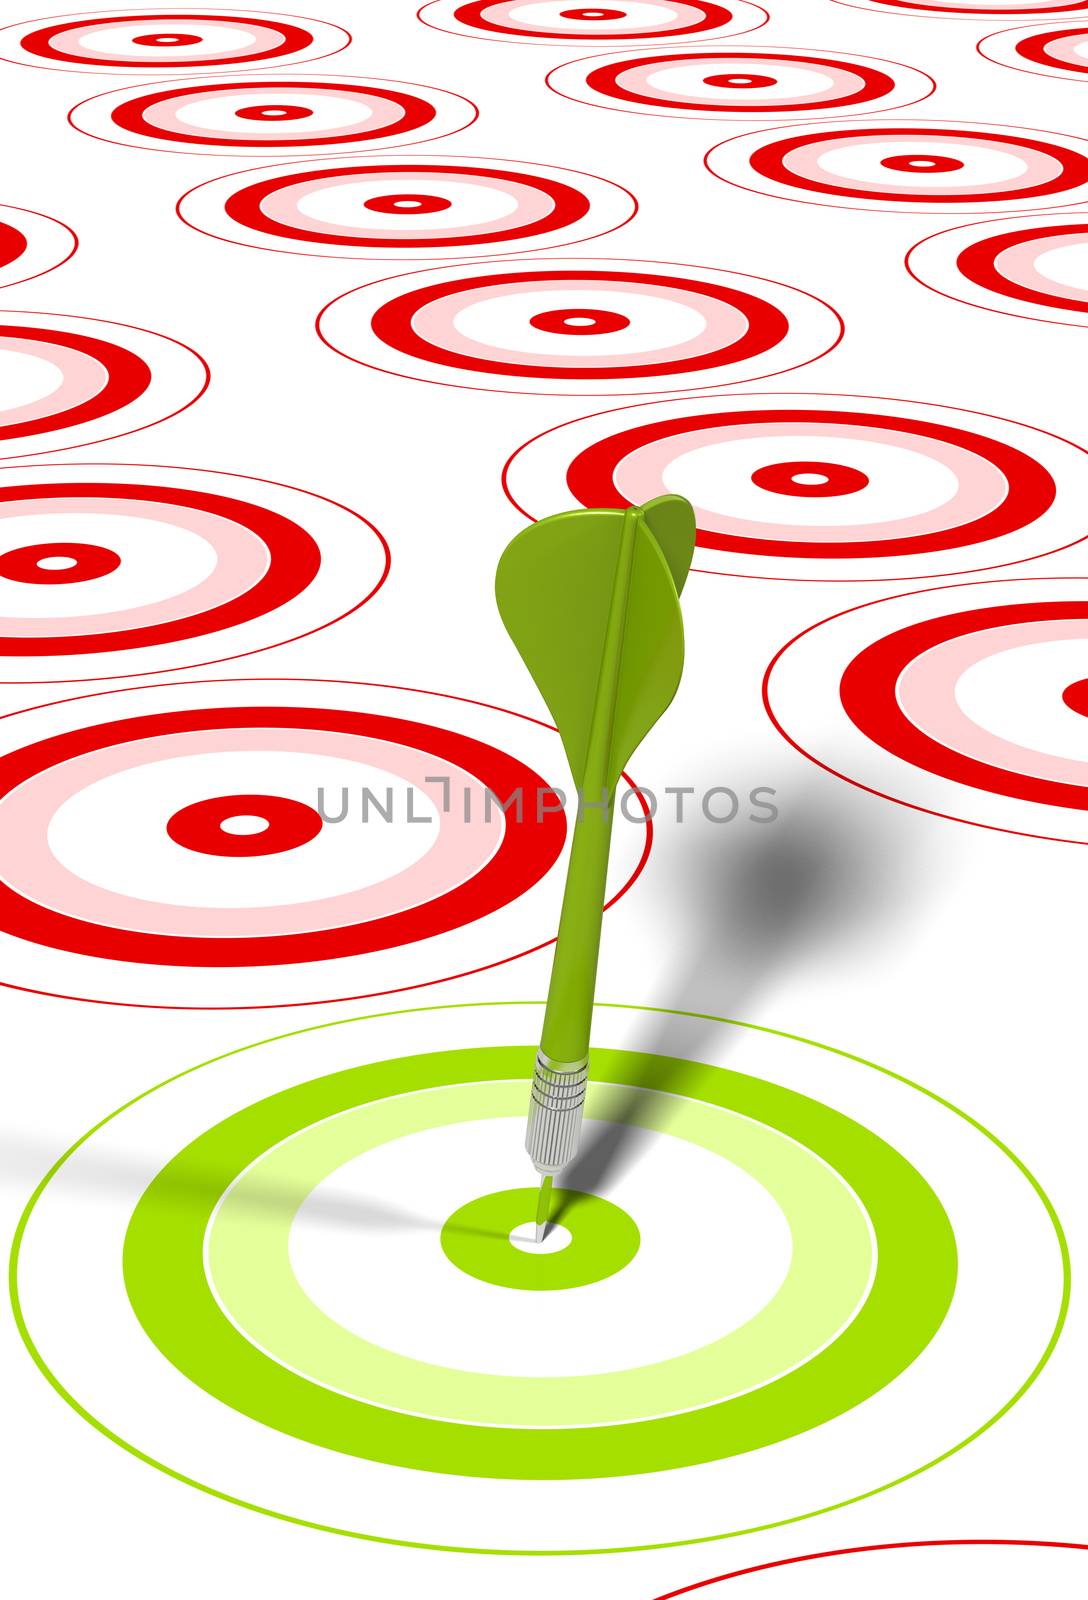 green dart hitting the center of a red target, there is some red targets around